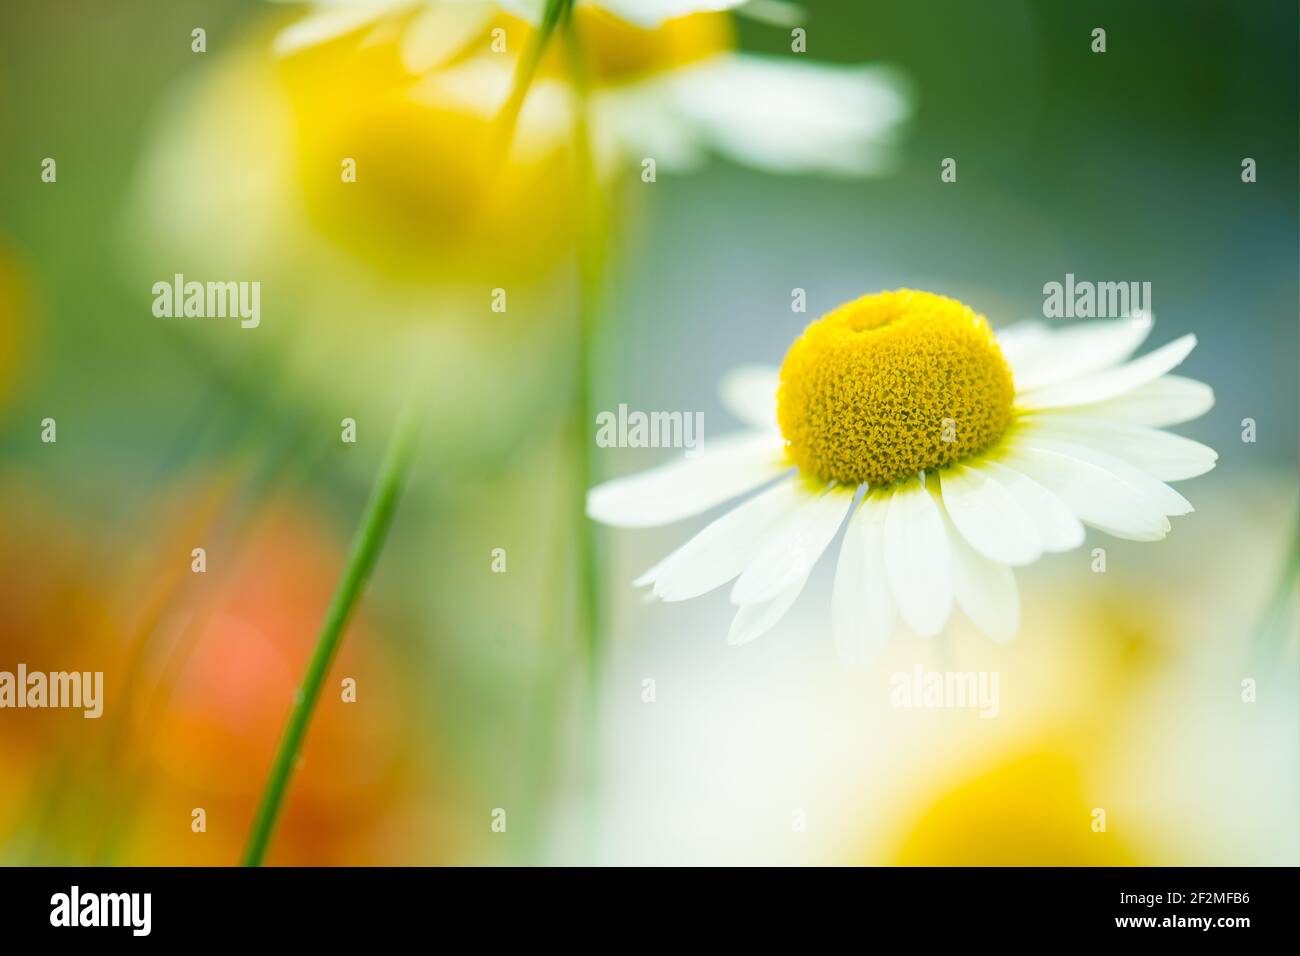 Close up of a single anthemis ‘E C Buxton’ flowerhead against blurred flowers. Stock Photo